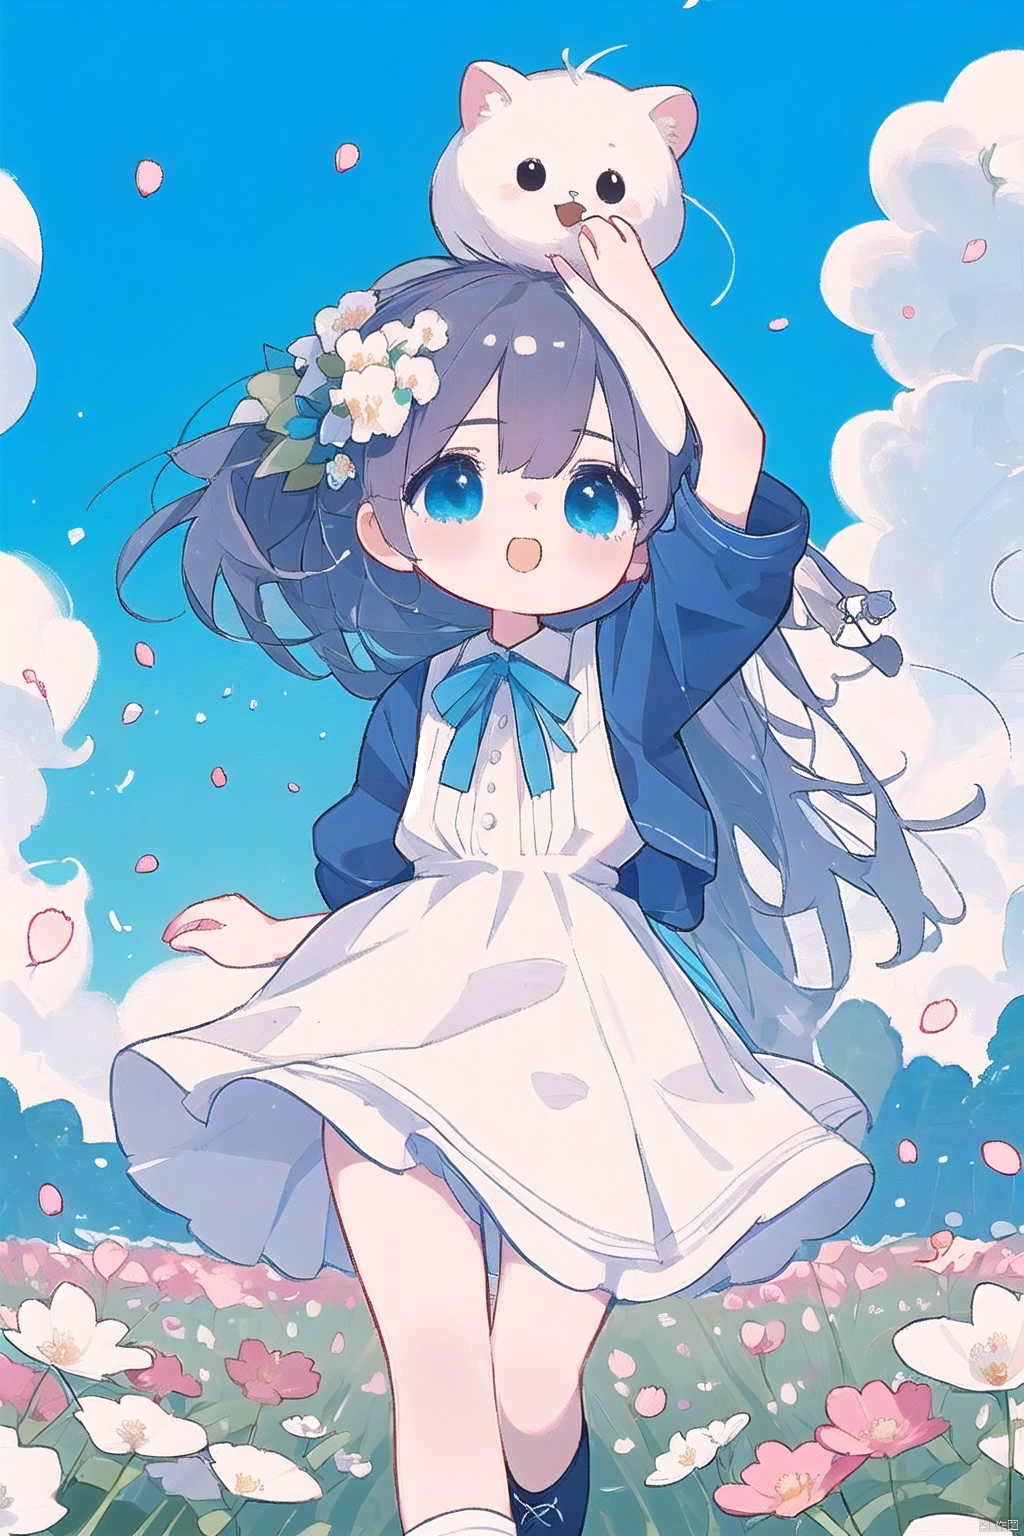 1 girl, beautiful and lovely, running in the flower field with her back, holding a bouquet of flowers in her hand, wearing a flower wreath on her head, a white short skirt, swaying in the breeze, petals dancing, blue sky and white clouds, loli,artist:nano, 30710